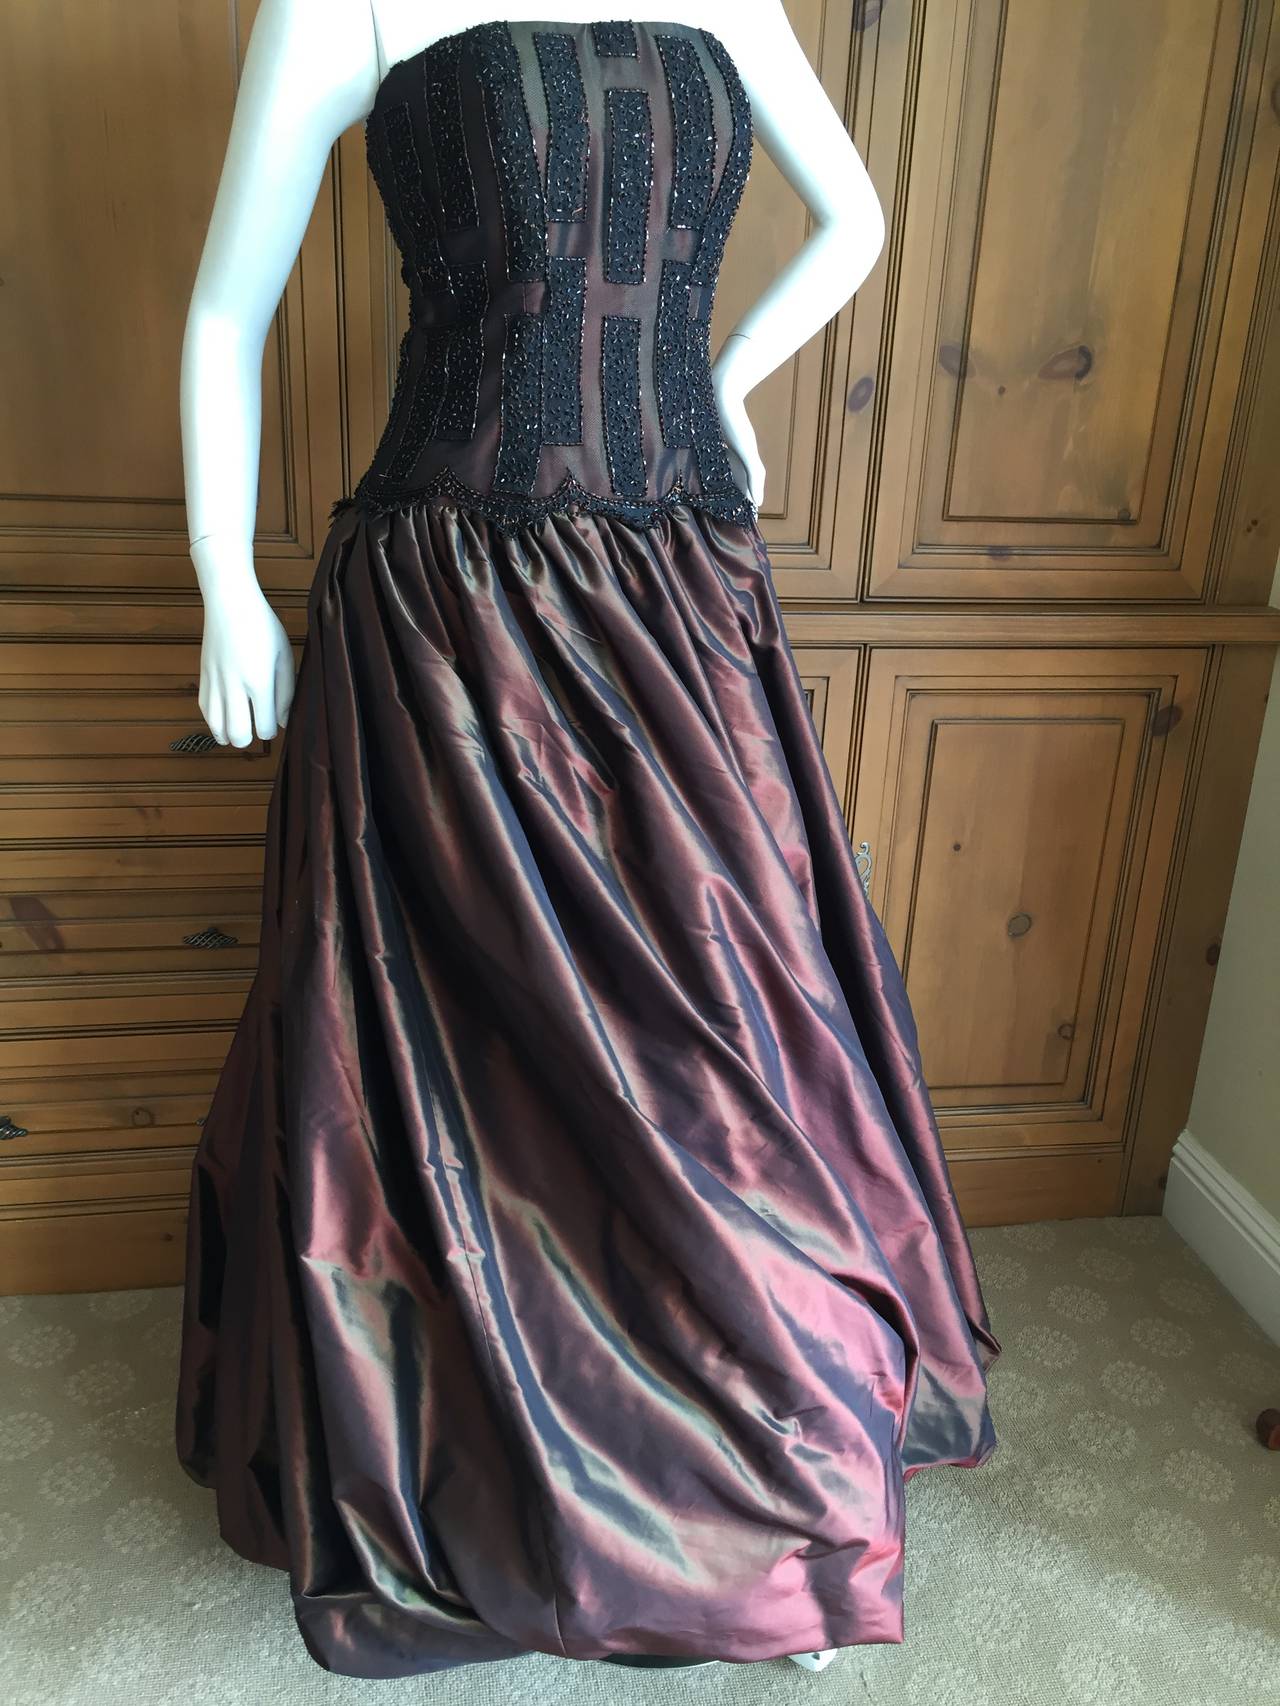 Bob Mackie Dreamy Iridescent Chocolate Silk Beaded Dress with Matching Jacket 
This is so romantic, the skirt is very full with under layers expertly draped.
The top is beading on black netting overlaid on the silk.
There is a full inner corset